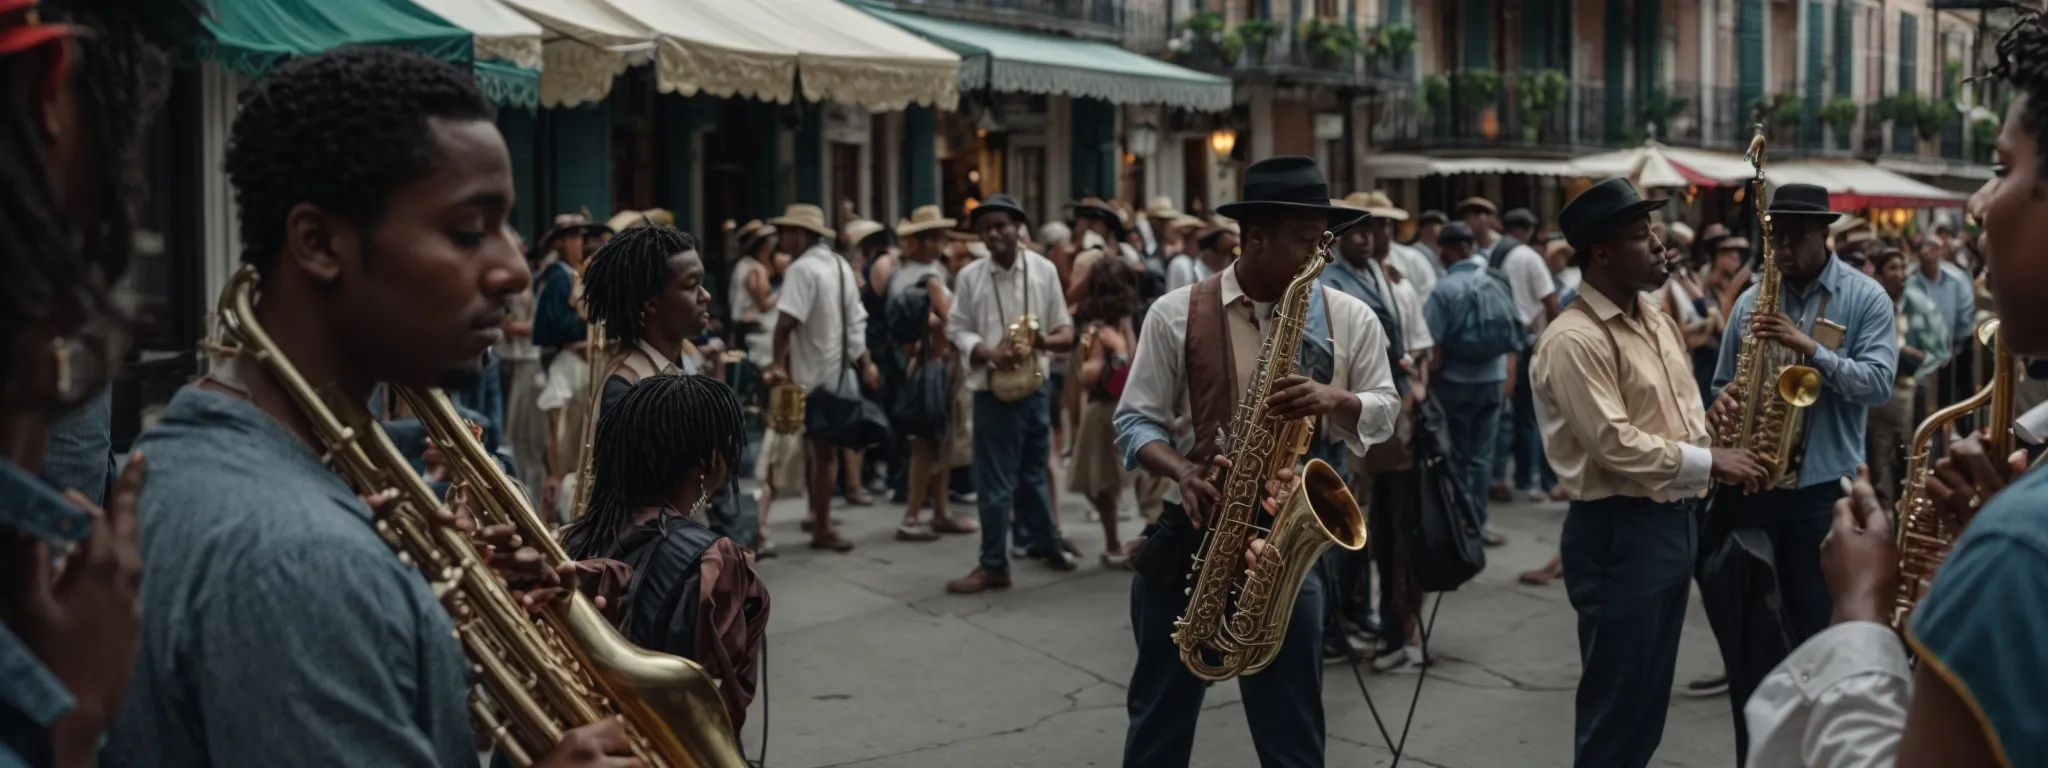 a jazz band performs in the lively french quarter, capturing the essence of new orleans culture on social media.